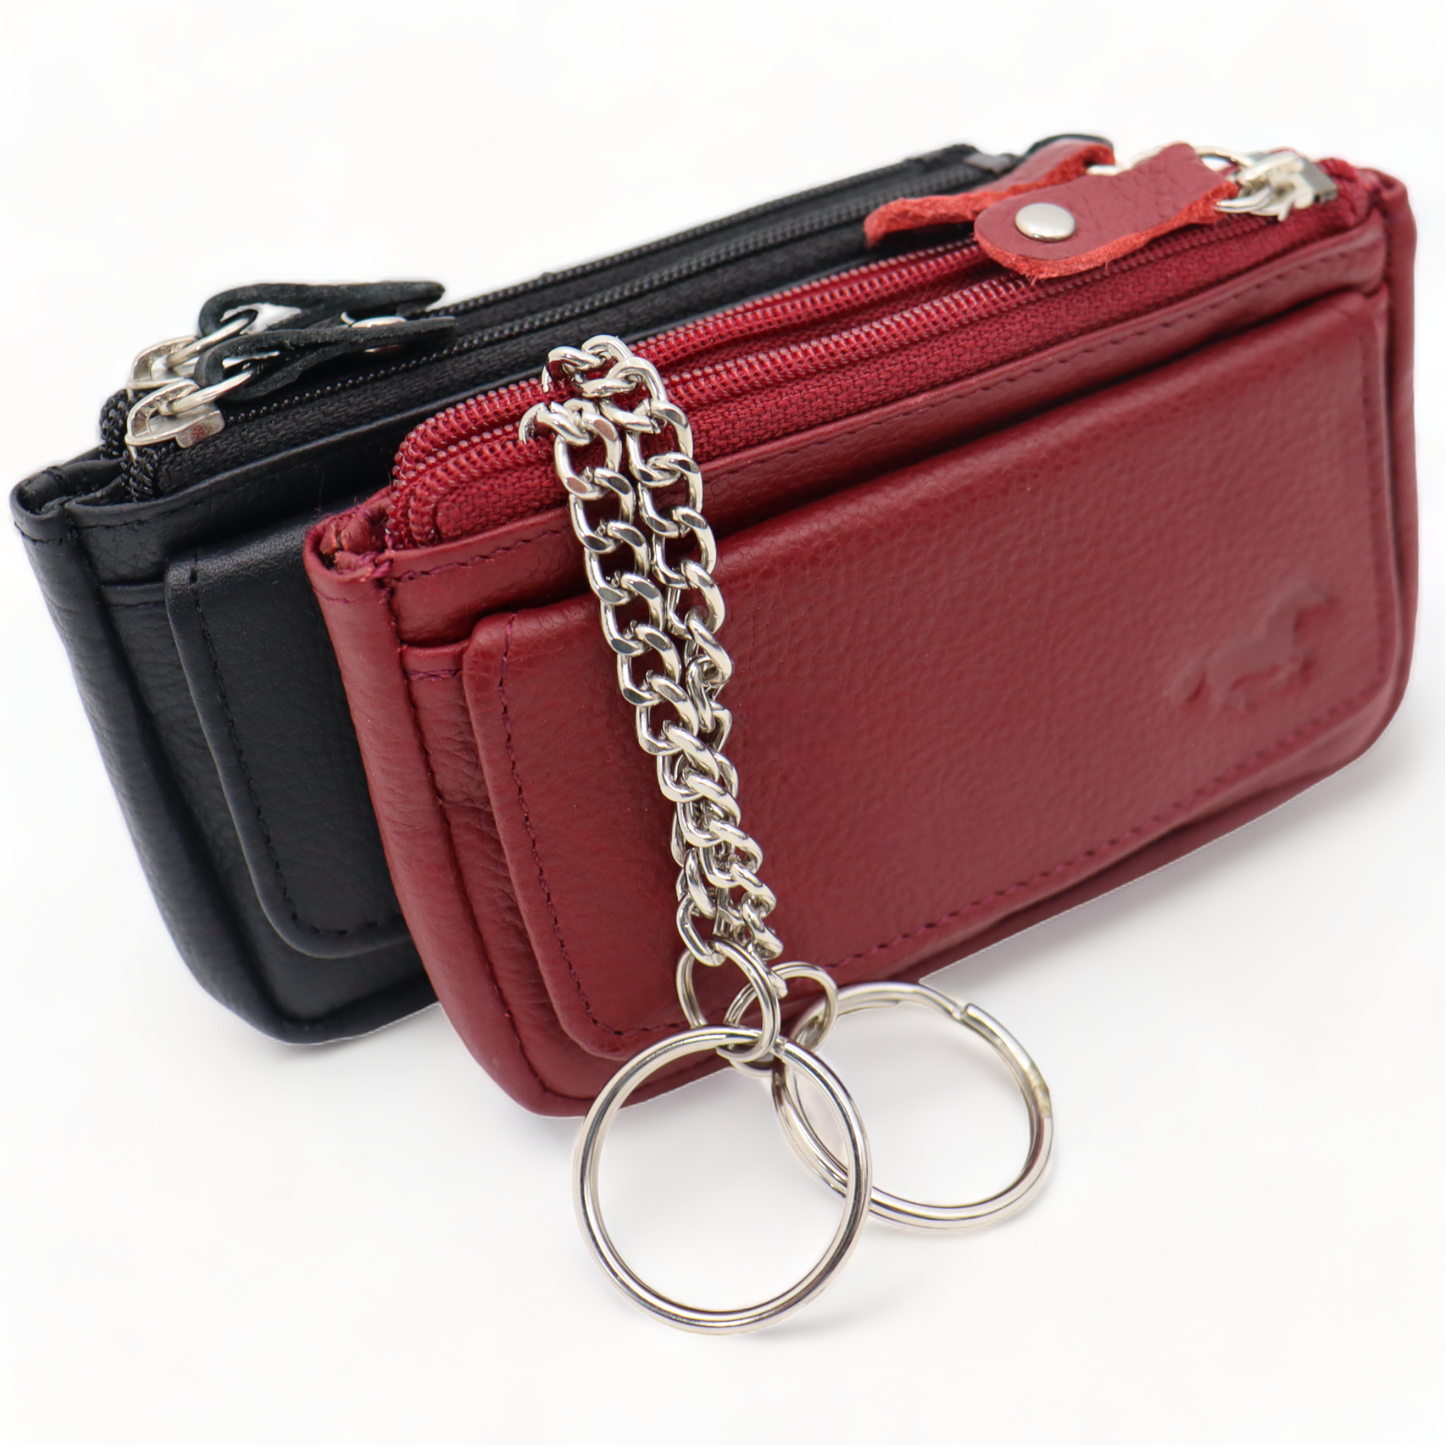 Safekeepers key pouch - key pouch with zipper - key pouch ladies - key folder - key purse - key pouch - key pouch men Black